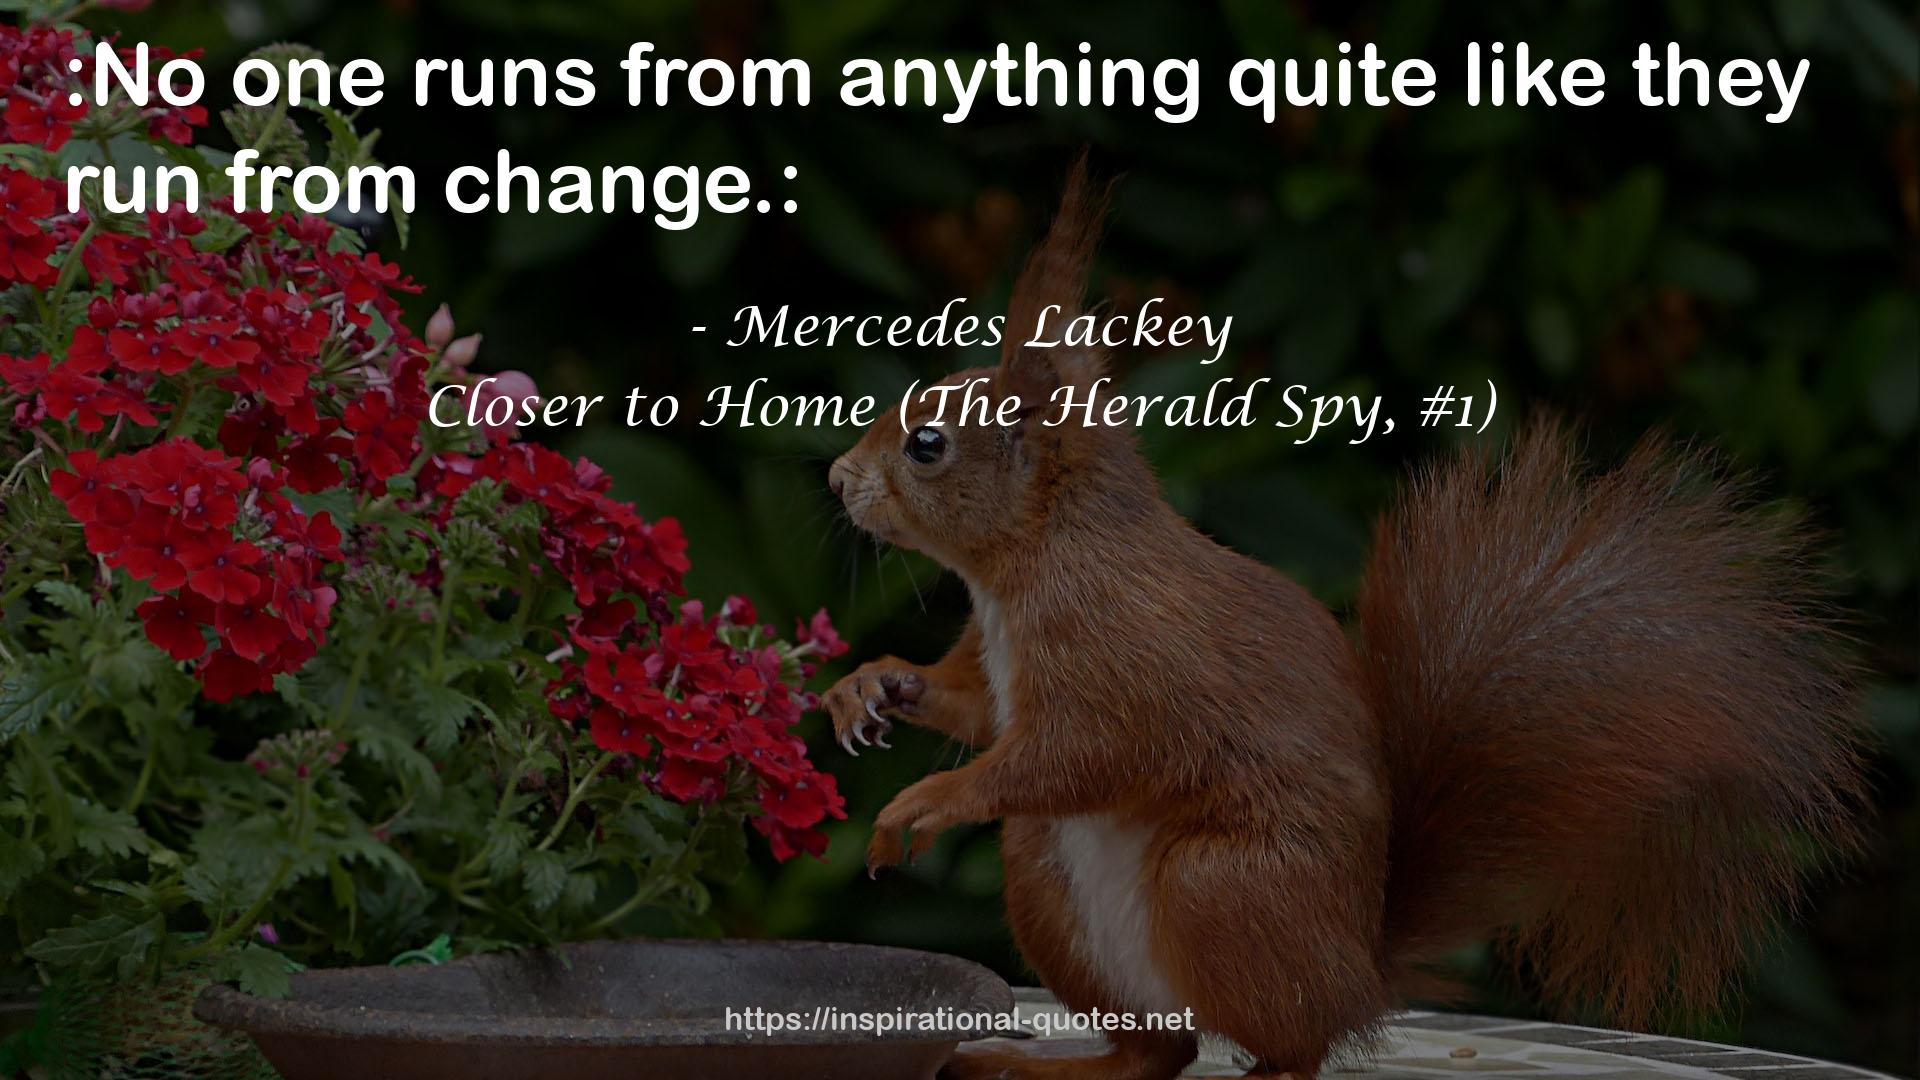 Closer to Home (The Herald Spy, #1) QUOTES